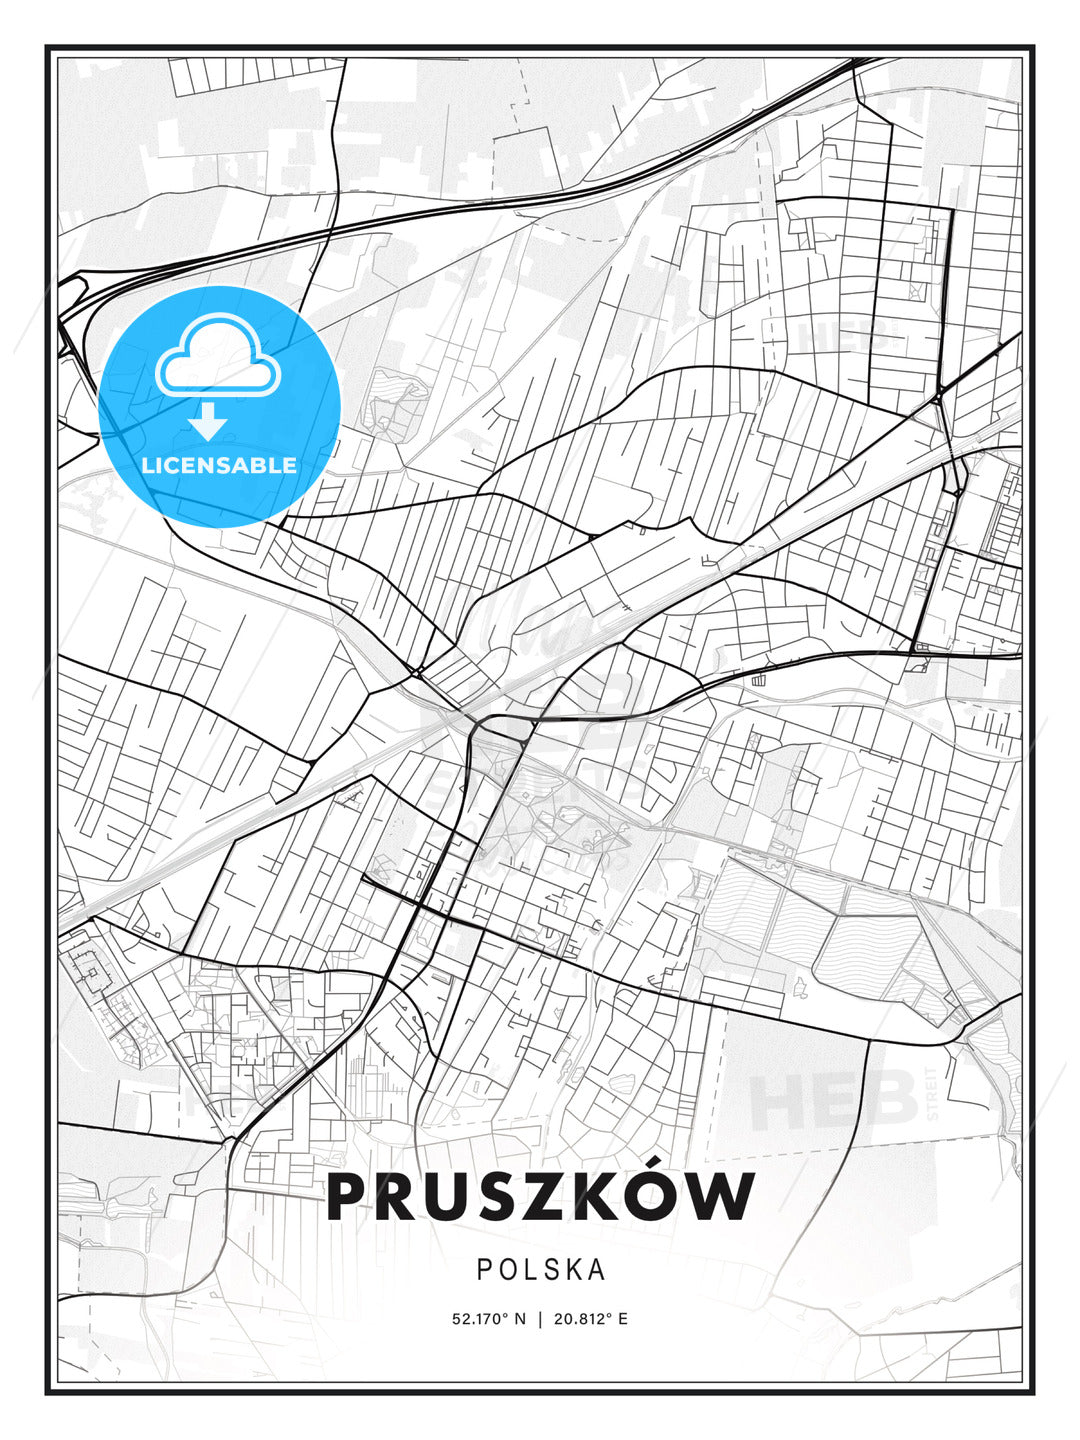 Pruszków, Poland, Modern Print Template in Various Formats - HEBSTREITS Sketches